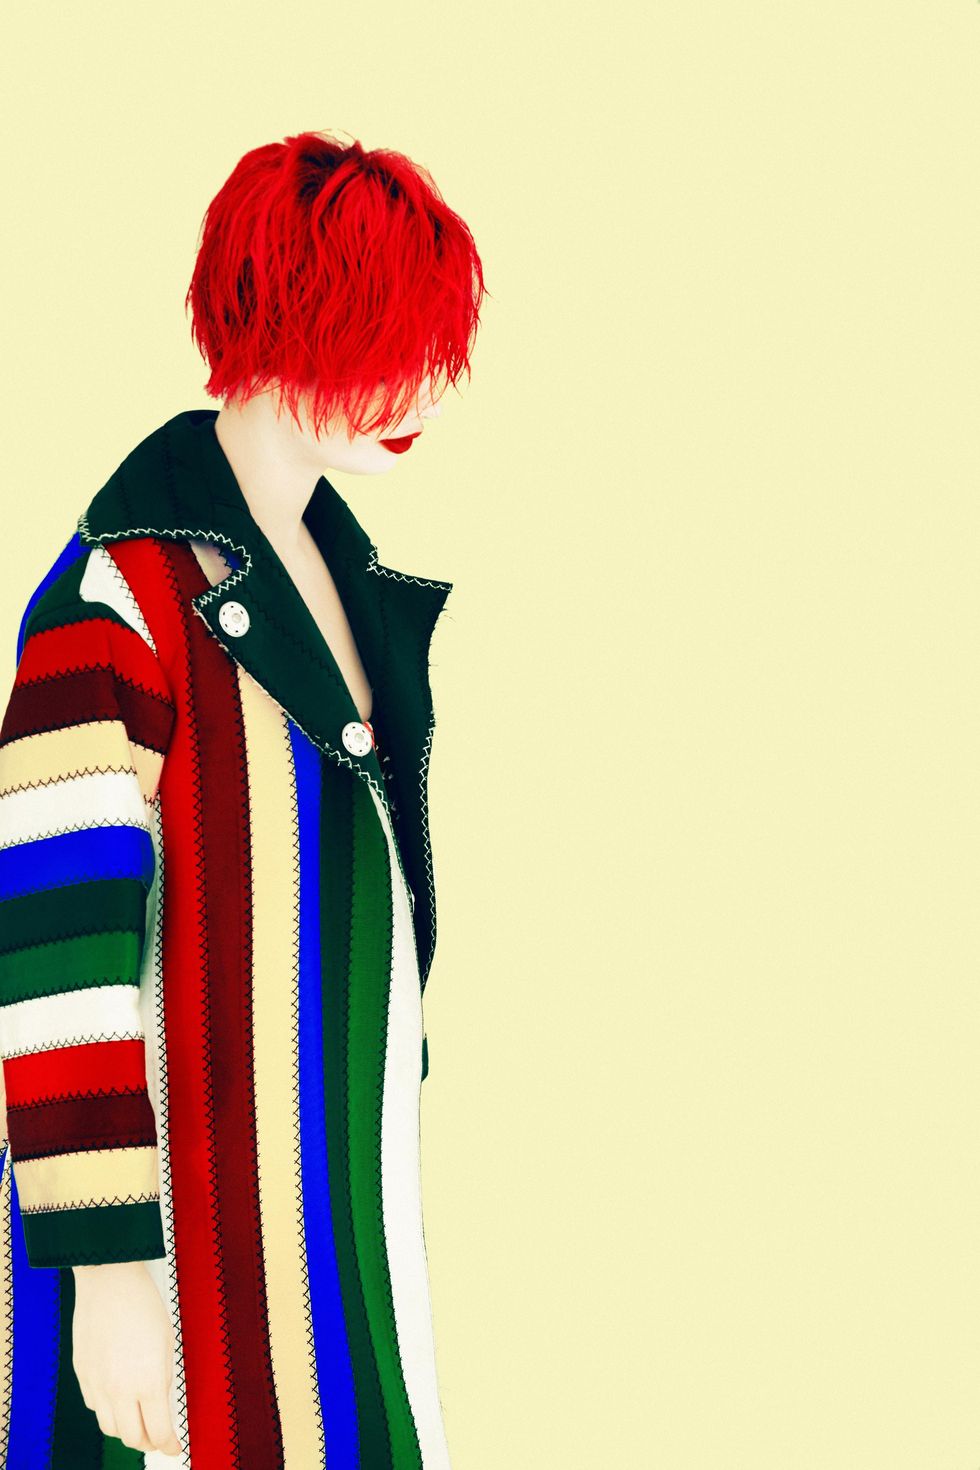 Collar, Style, Wig, Bangs, Red hair, Fashion illustration, Costume design, Costume, Blazer, Hair coloring, 